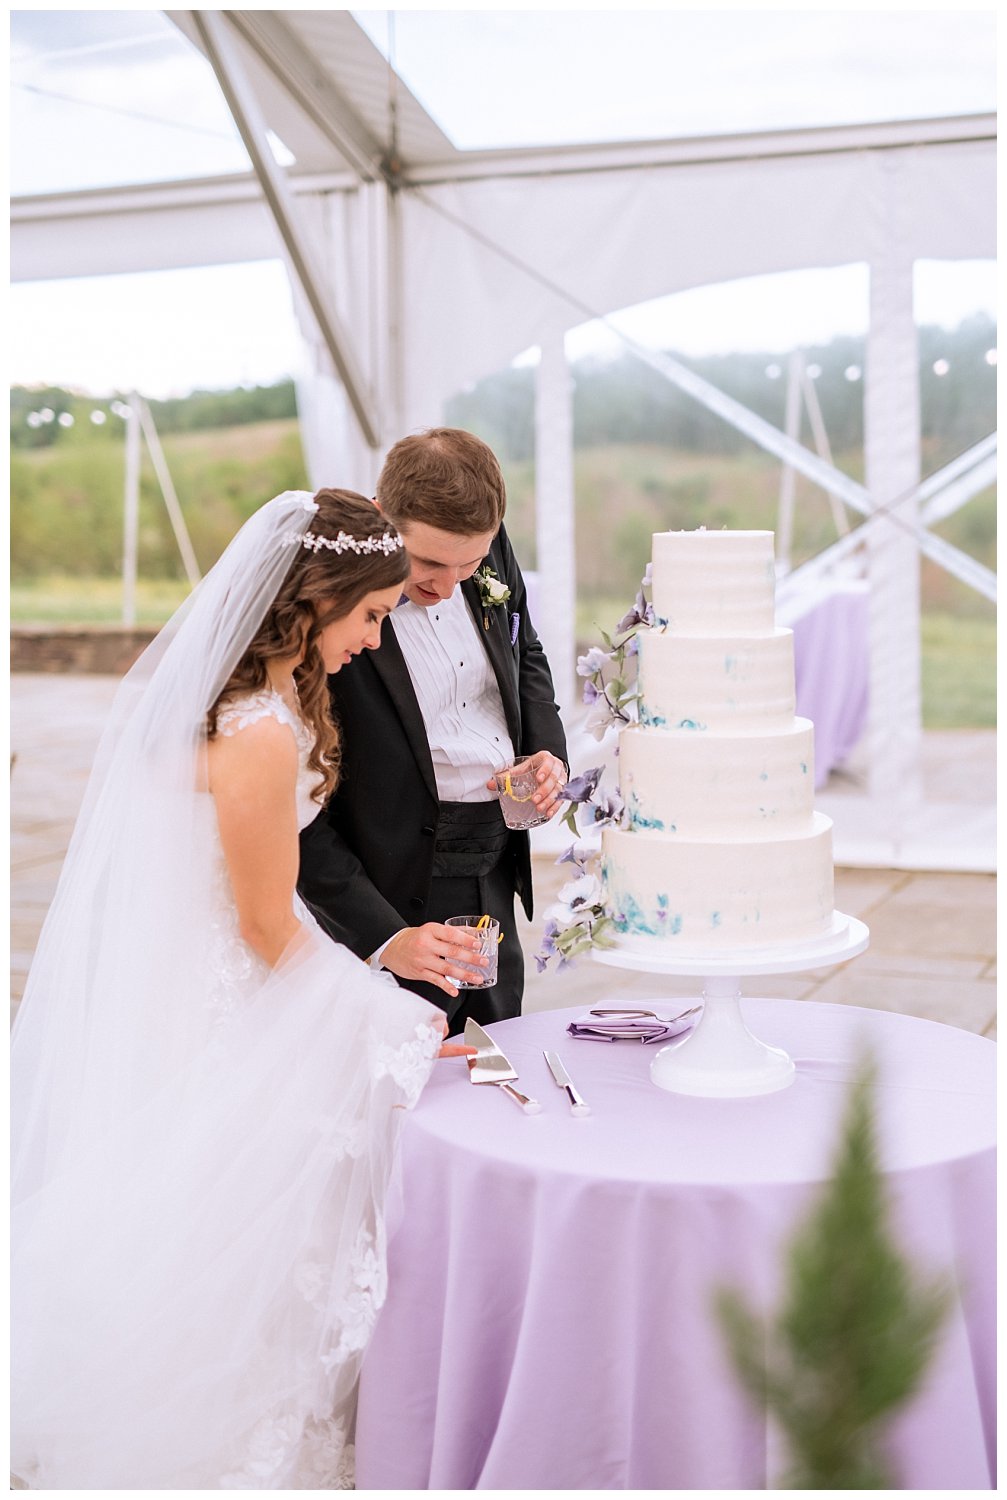 Lavender Wedding Cake at The Market at Grelen photographed by Heather Dodge Photography